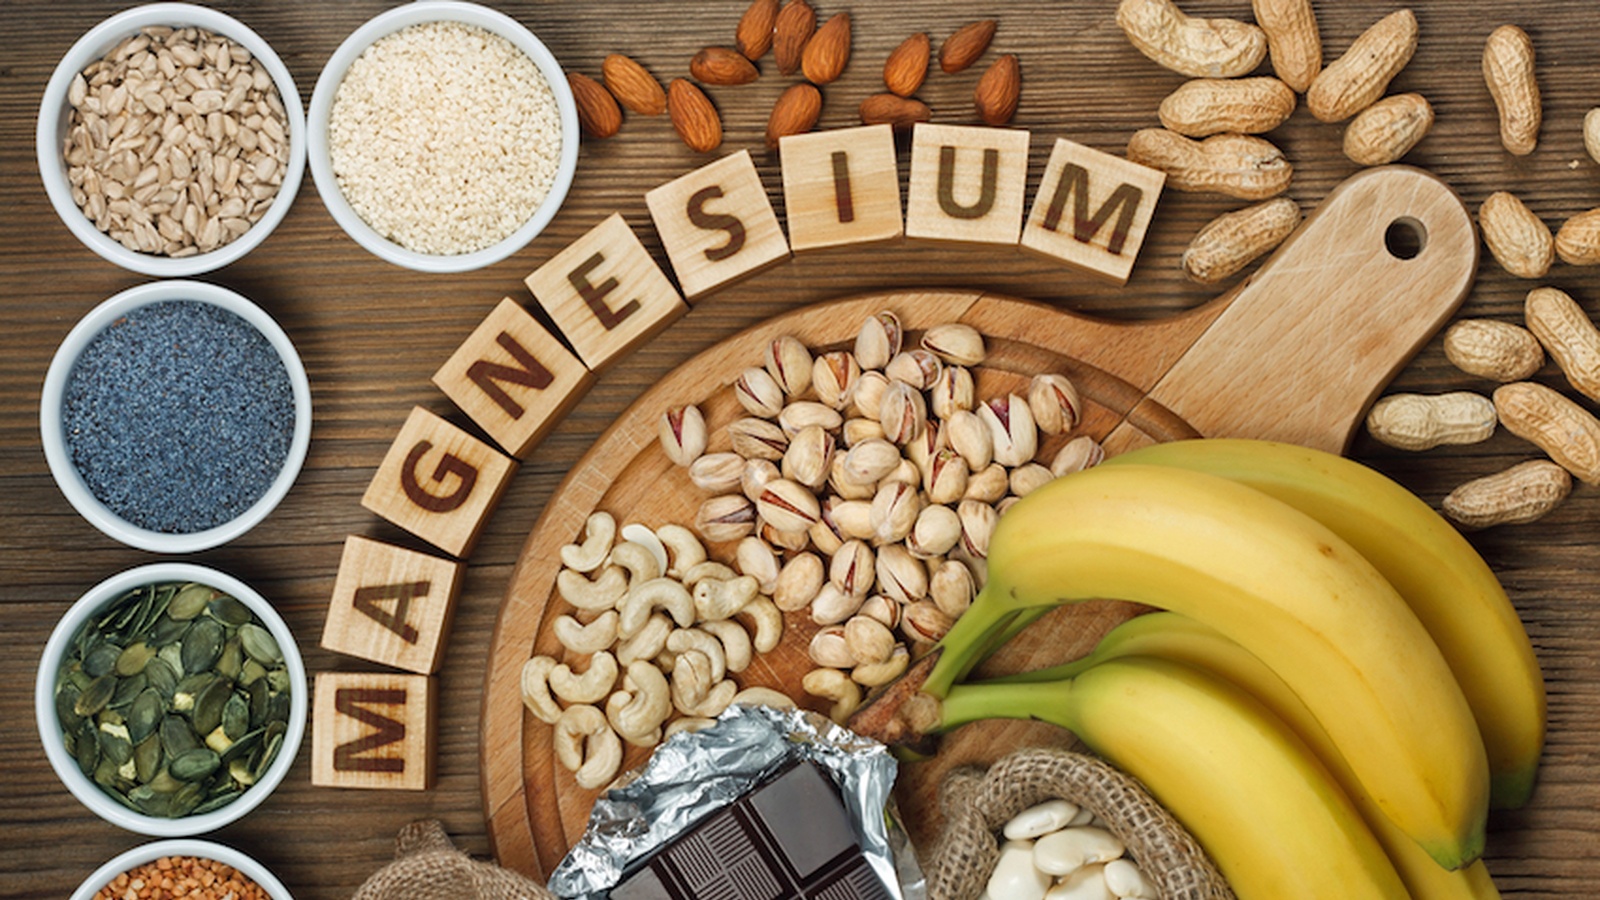 7 Signs You’re Not Getting Enough Magnesium